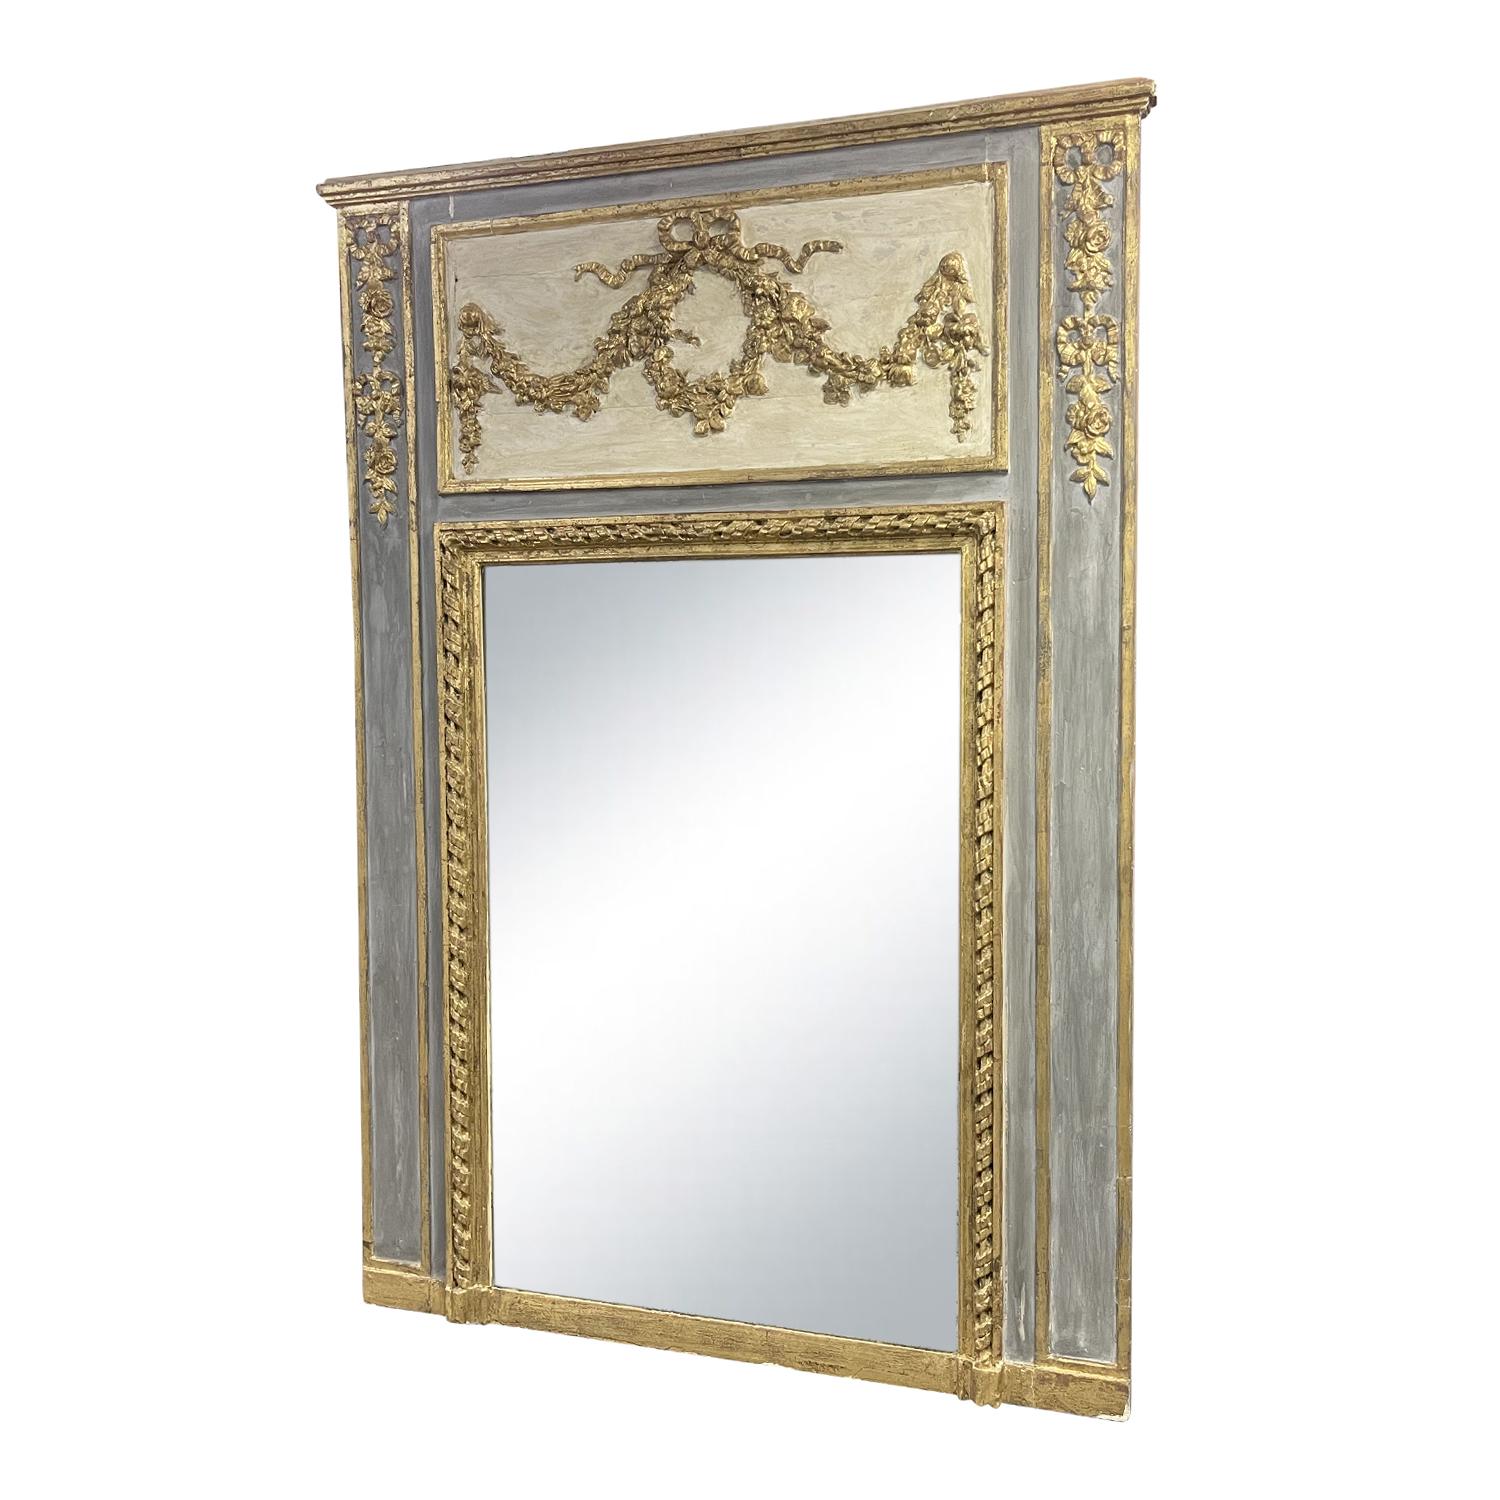 A 19th century French antique mirror patinated in a grey-bleu finish. Partial giltwood and original mirrored glass, in good condition. The top of the Louis XVI trumeau mirror frame is lusciously decorated and gilded with finely carved swags, floral